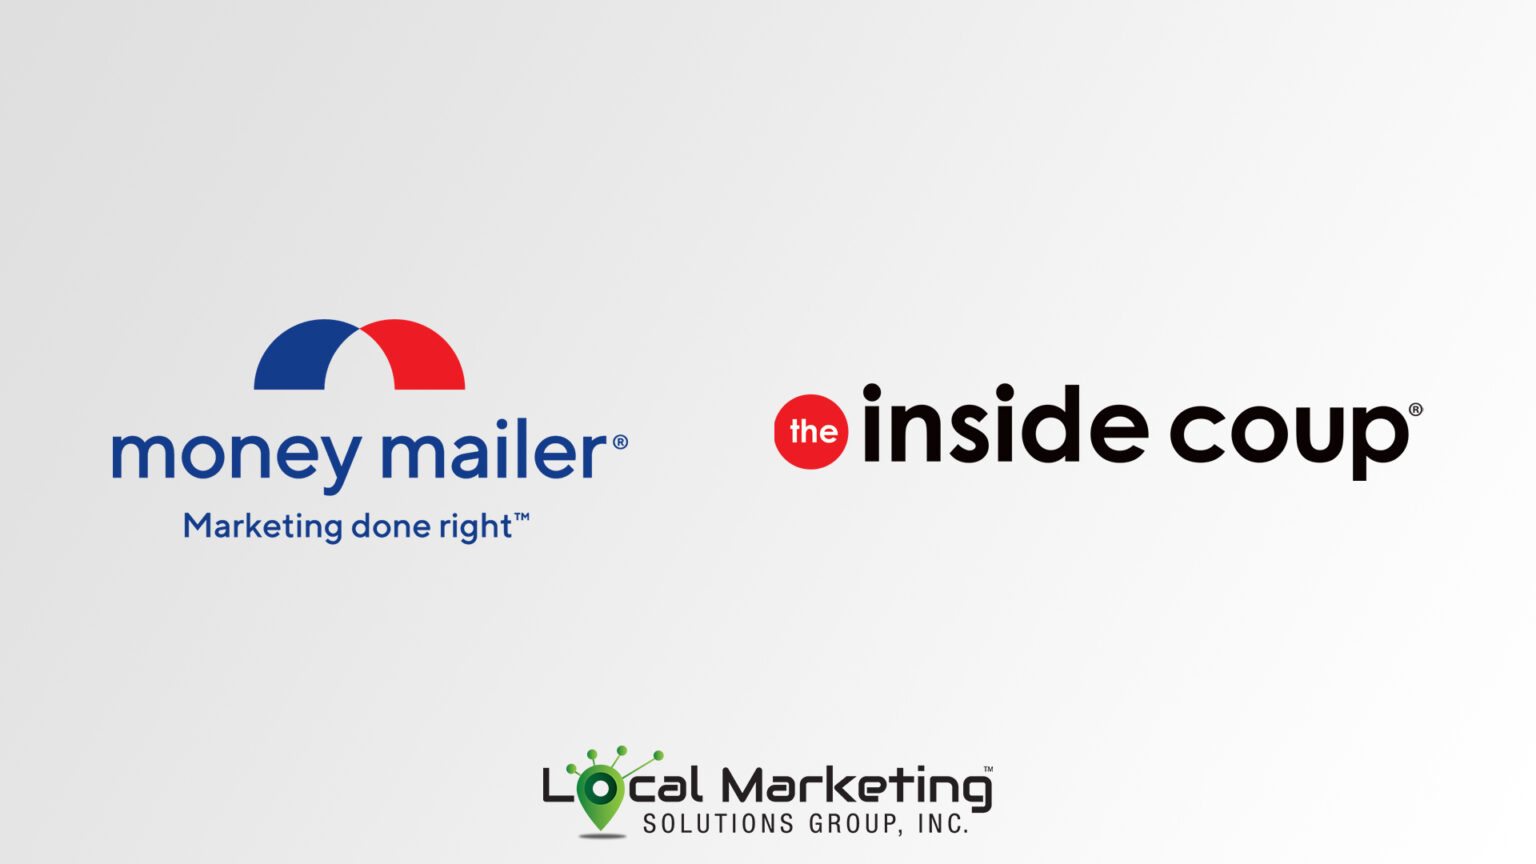 MoneyMailerUSA Acquires The Inside Coup, Expanding Reach To Meet Consumers’ Needs For More Savings